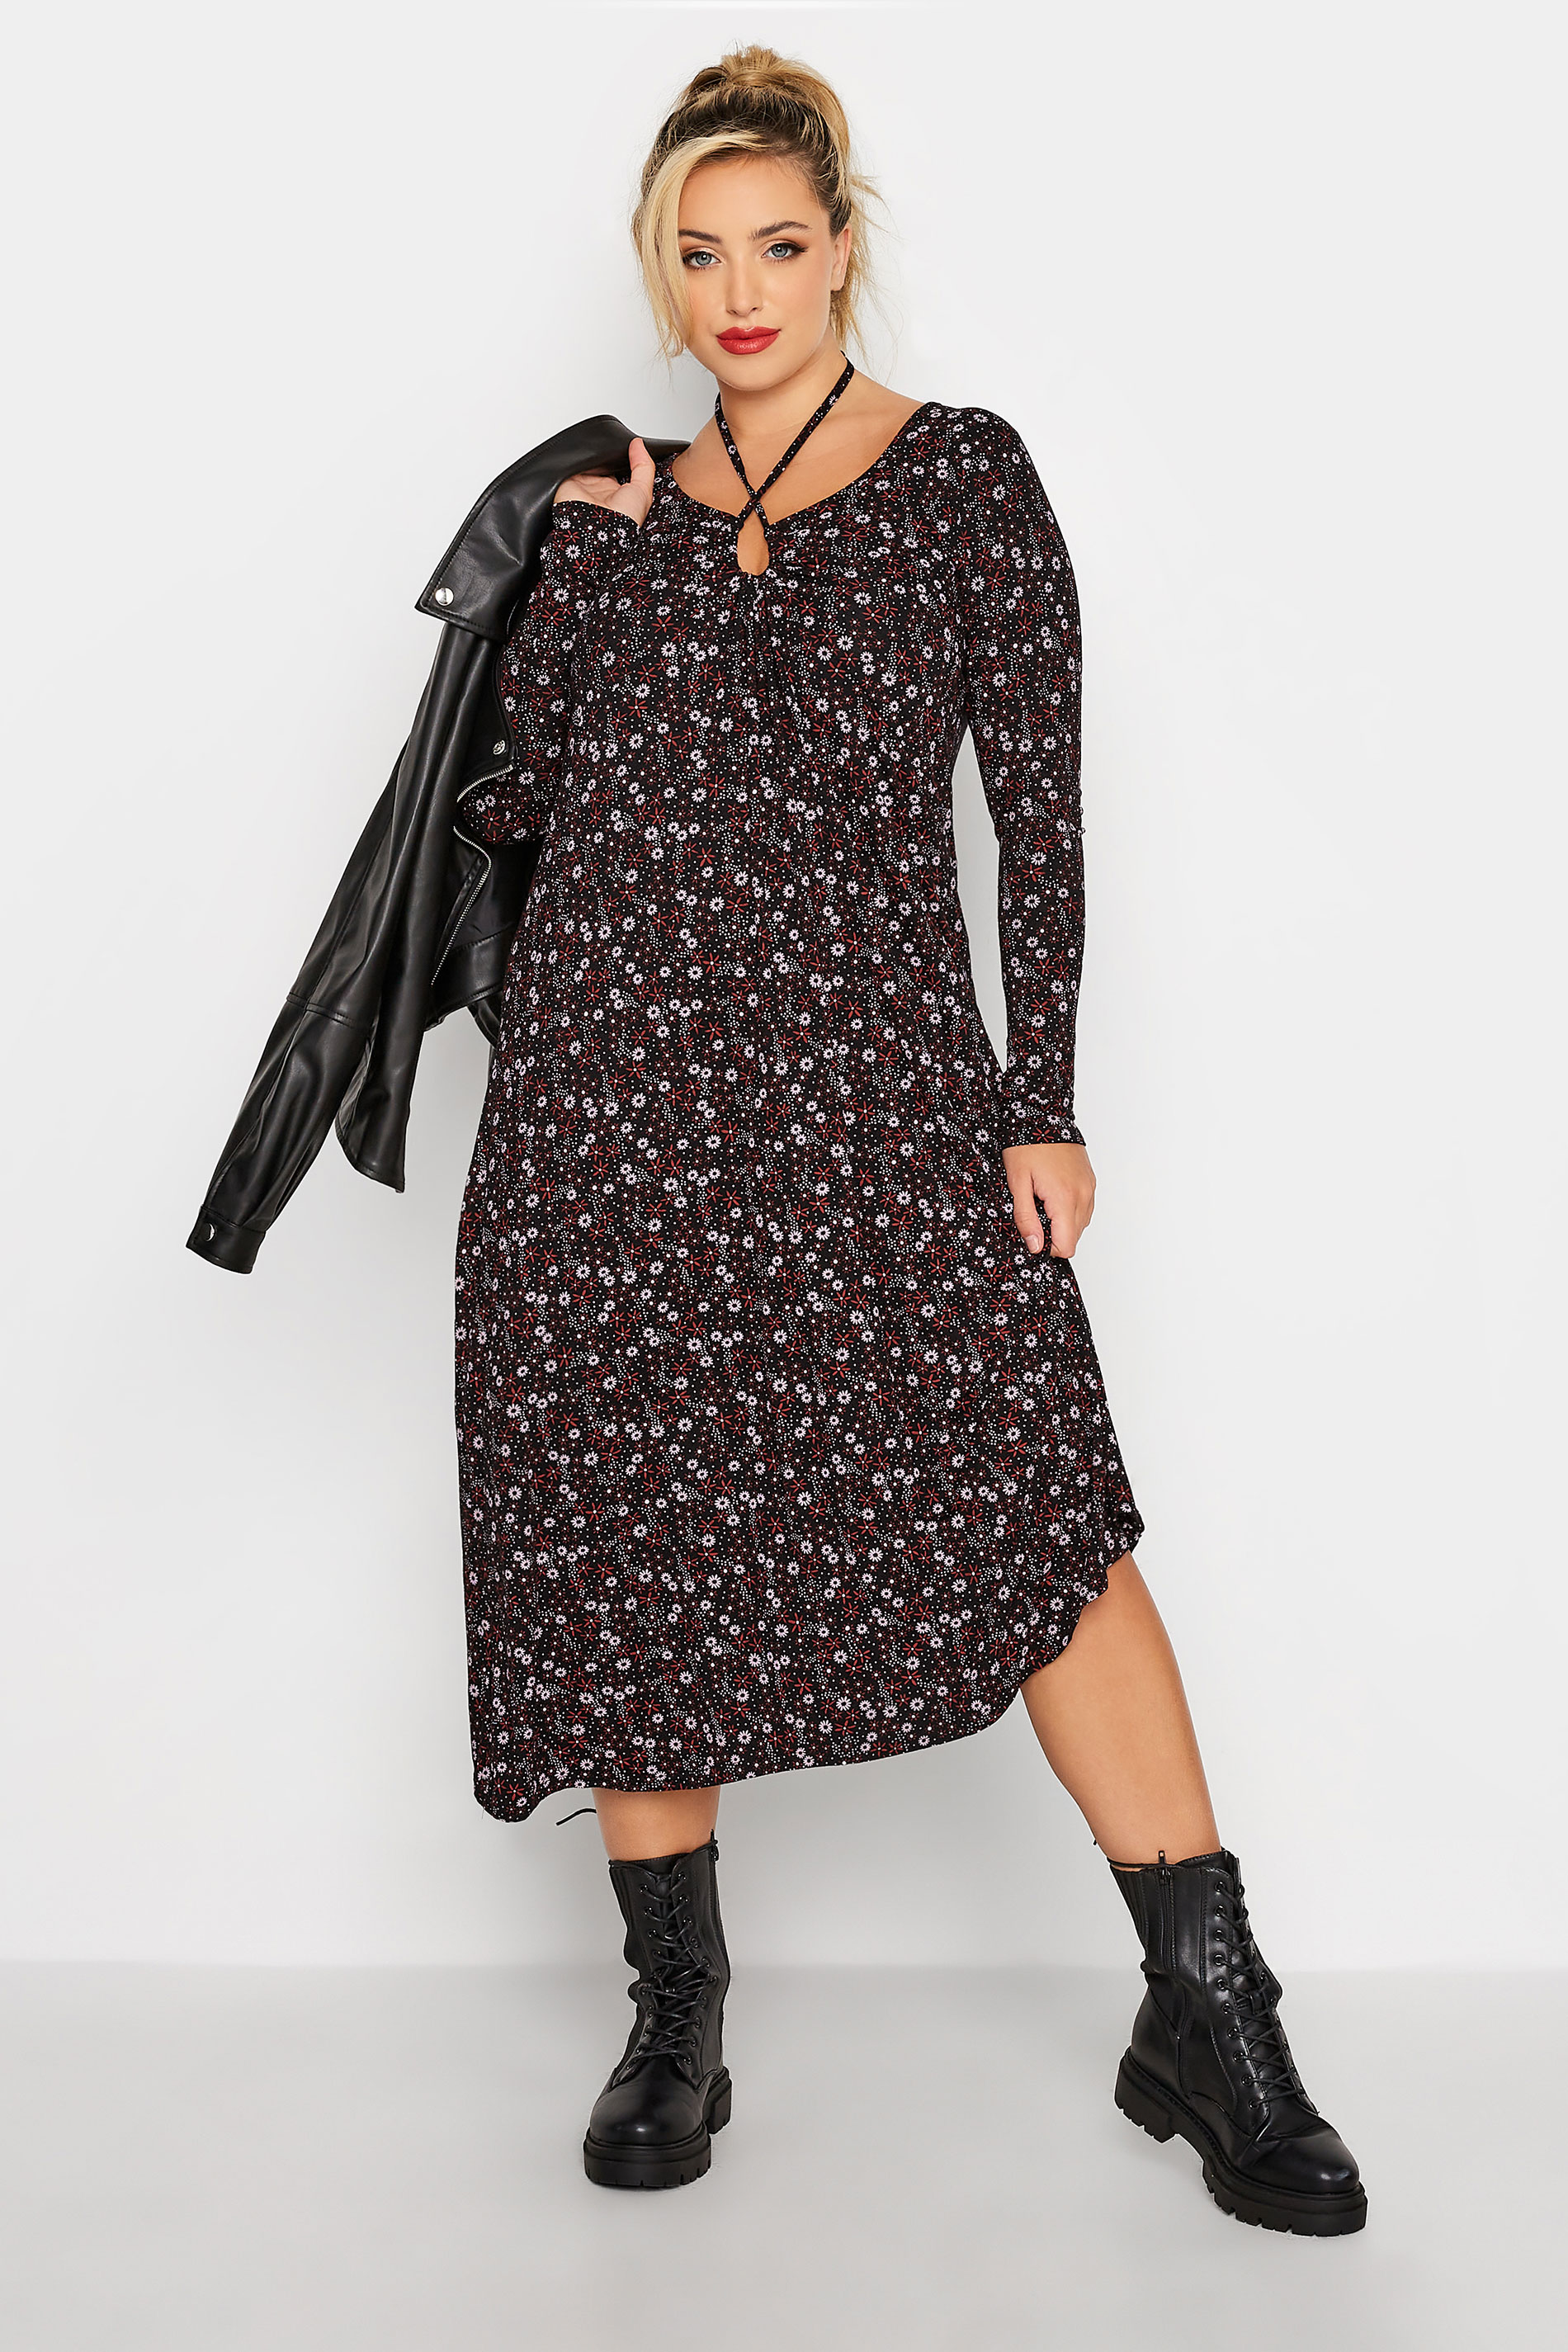 LIMITED COLLECTION Plus Size Black Ditsy Print Keyhole Tie Neck Midaxi Dress | Yours Clothing 1